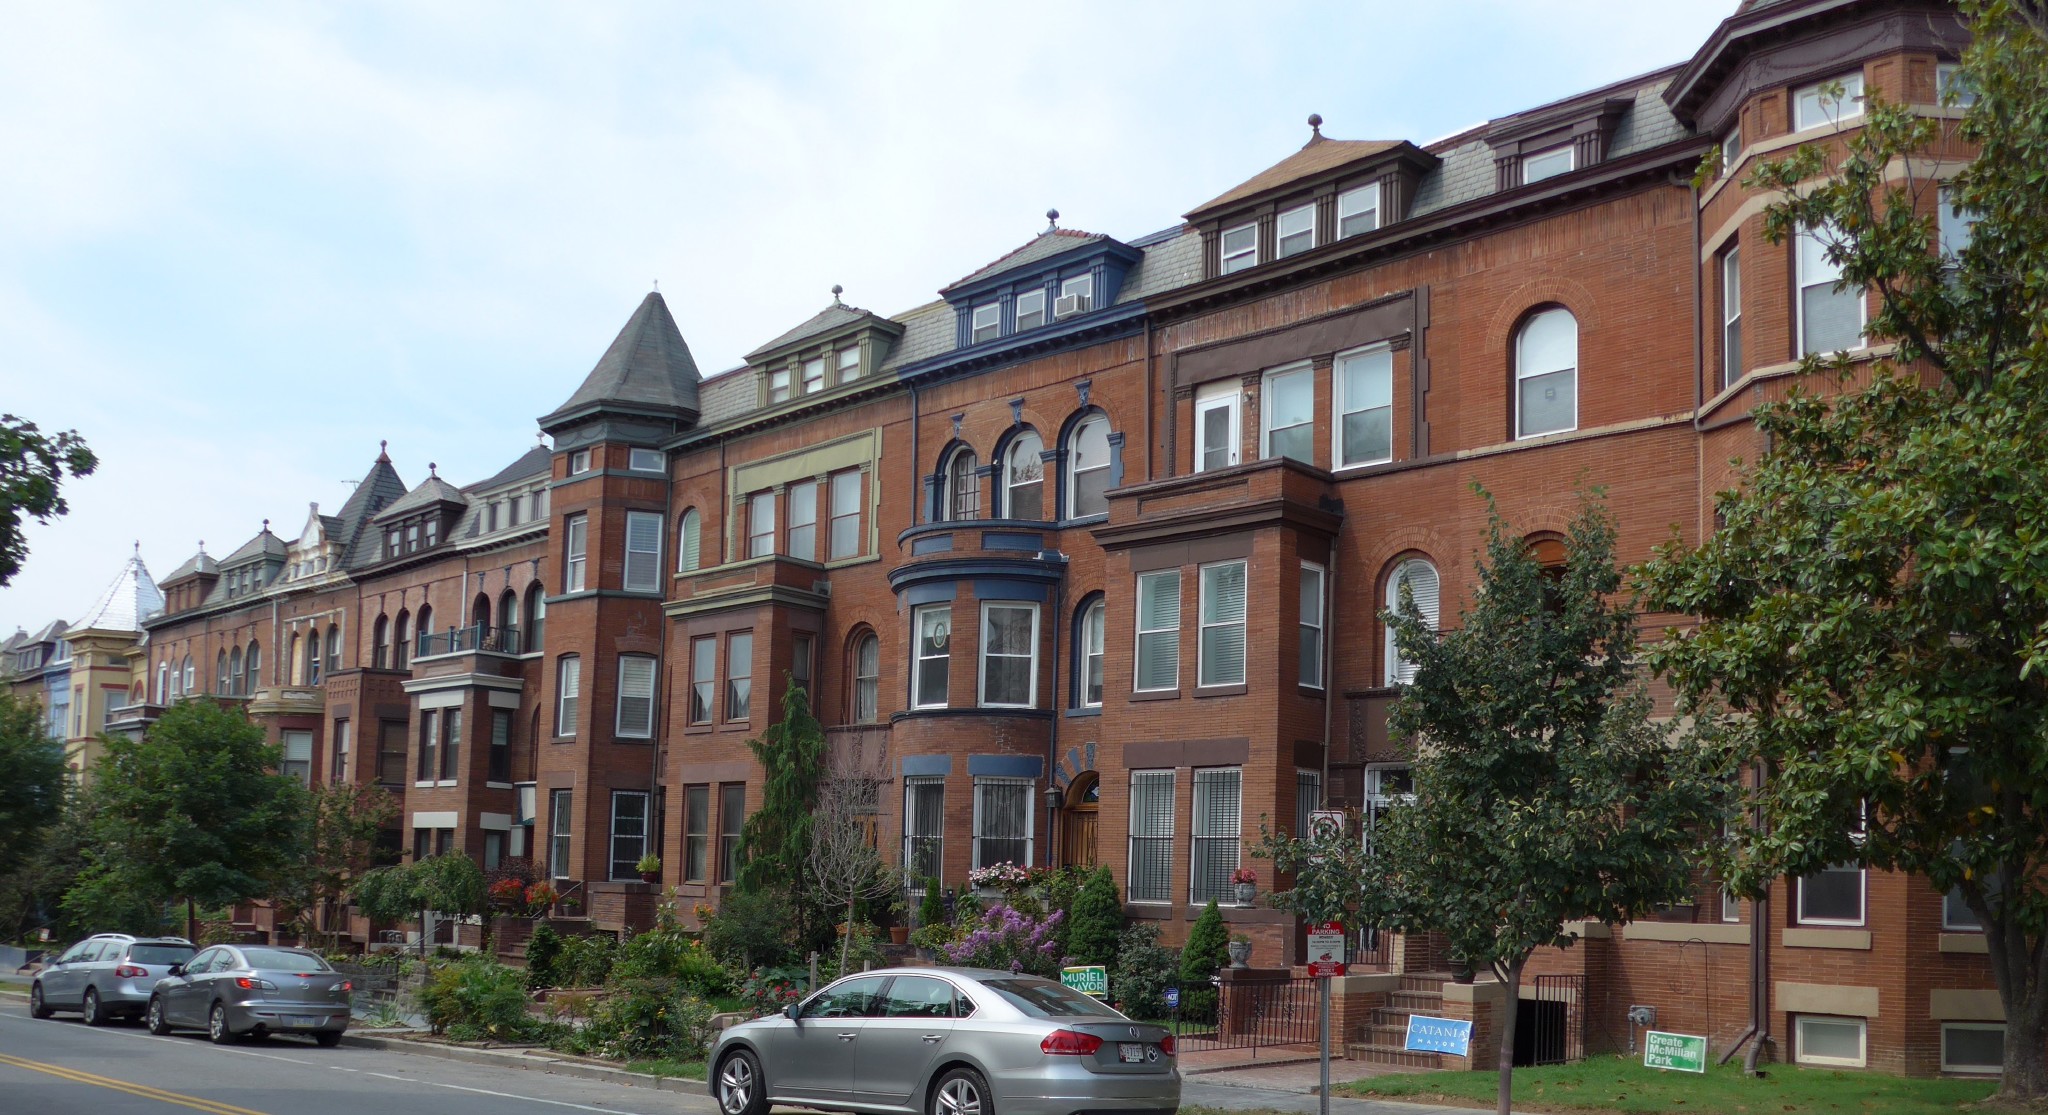 The 1868 rowhouses built into Bloomingdale's